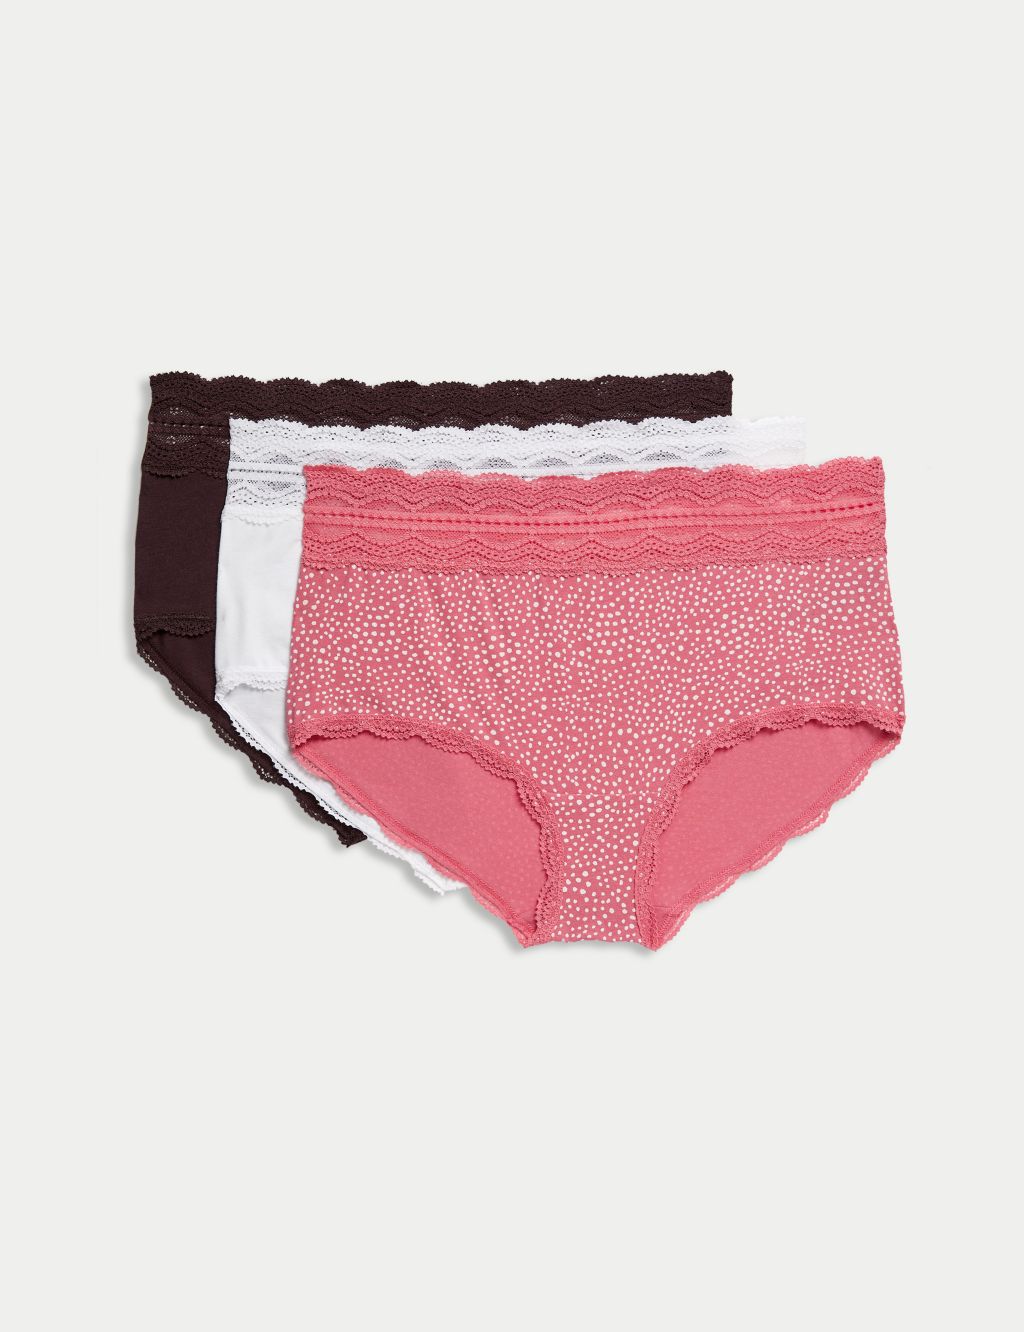 Laura Ashley Girls' Underwear - 10 Pack Stretch Cotton Briefs (Size: XS-L),  Size Large, Pink Dots/White Stripes/Pink Floral: Buy Online at Best Price  in UAE 